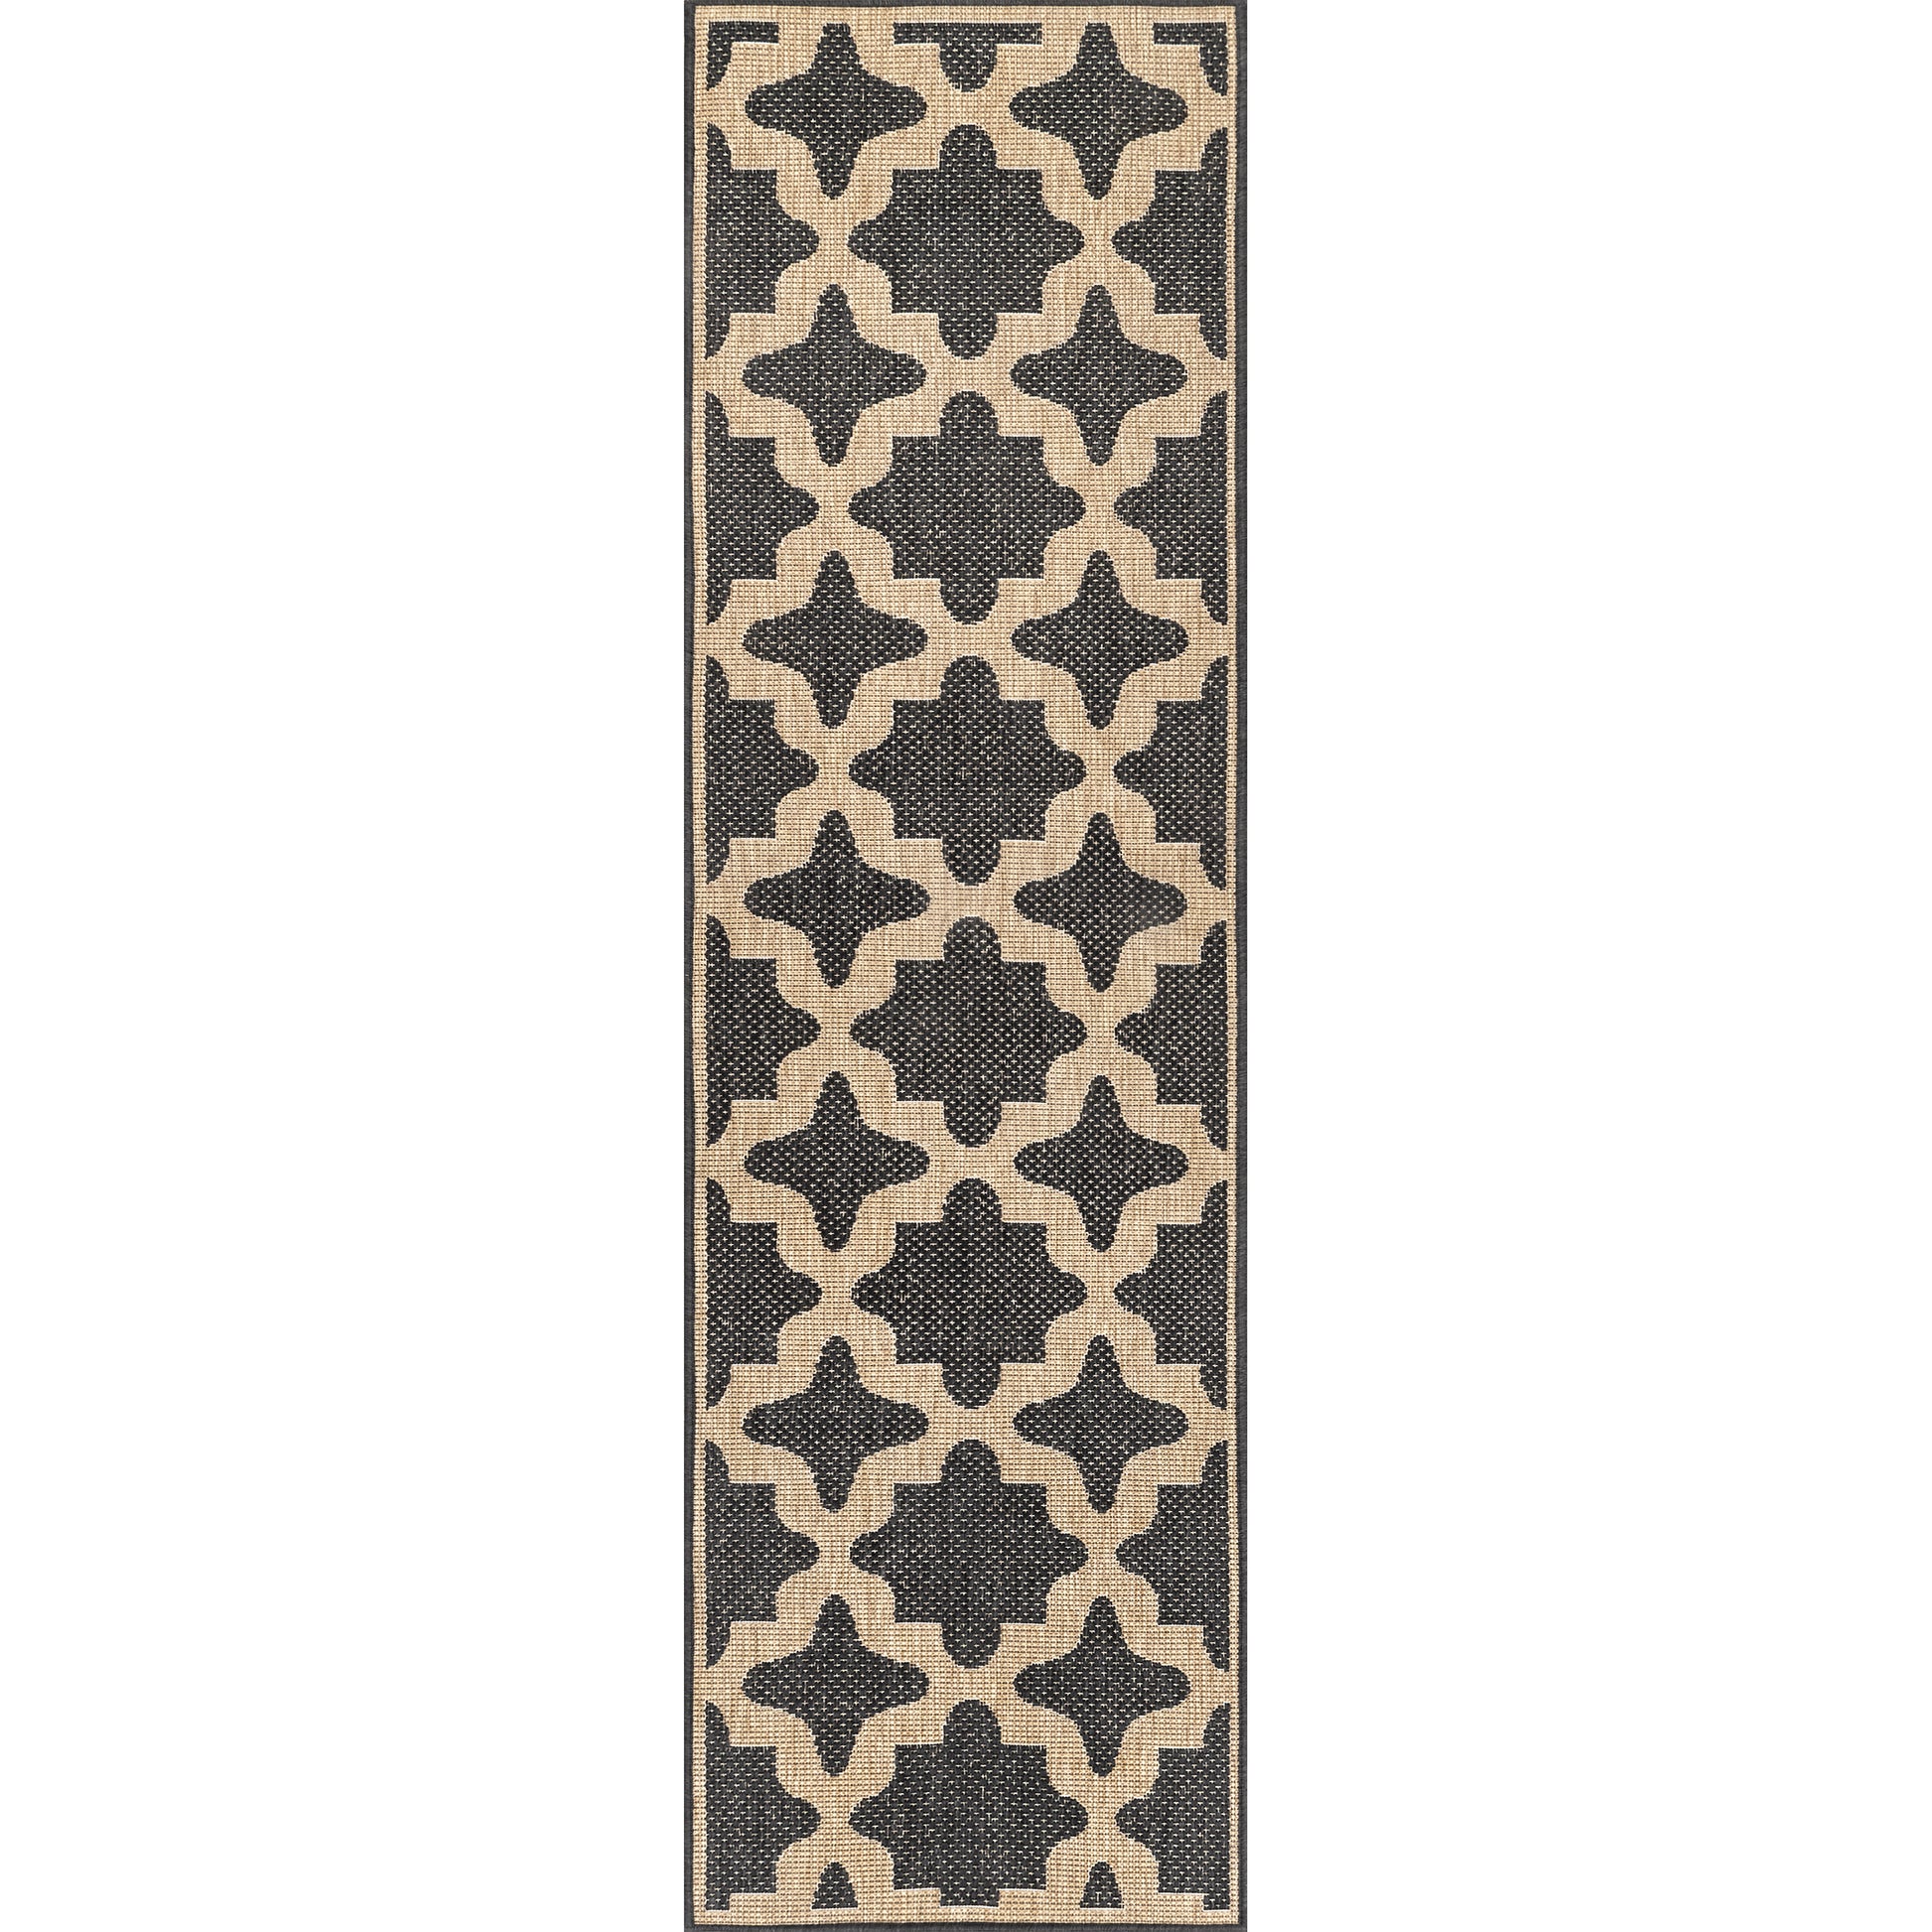 Nuloom Shiloh Star Nsh1784C Charcoal Area Rug